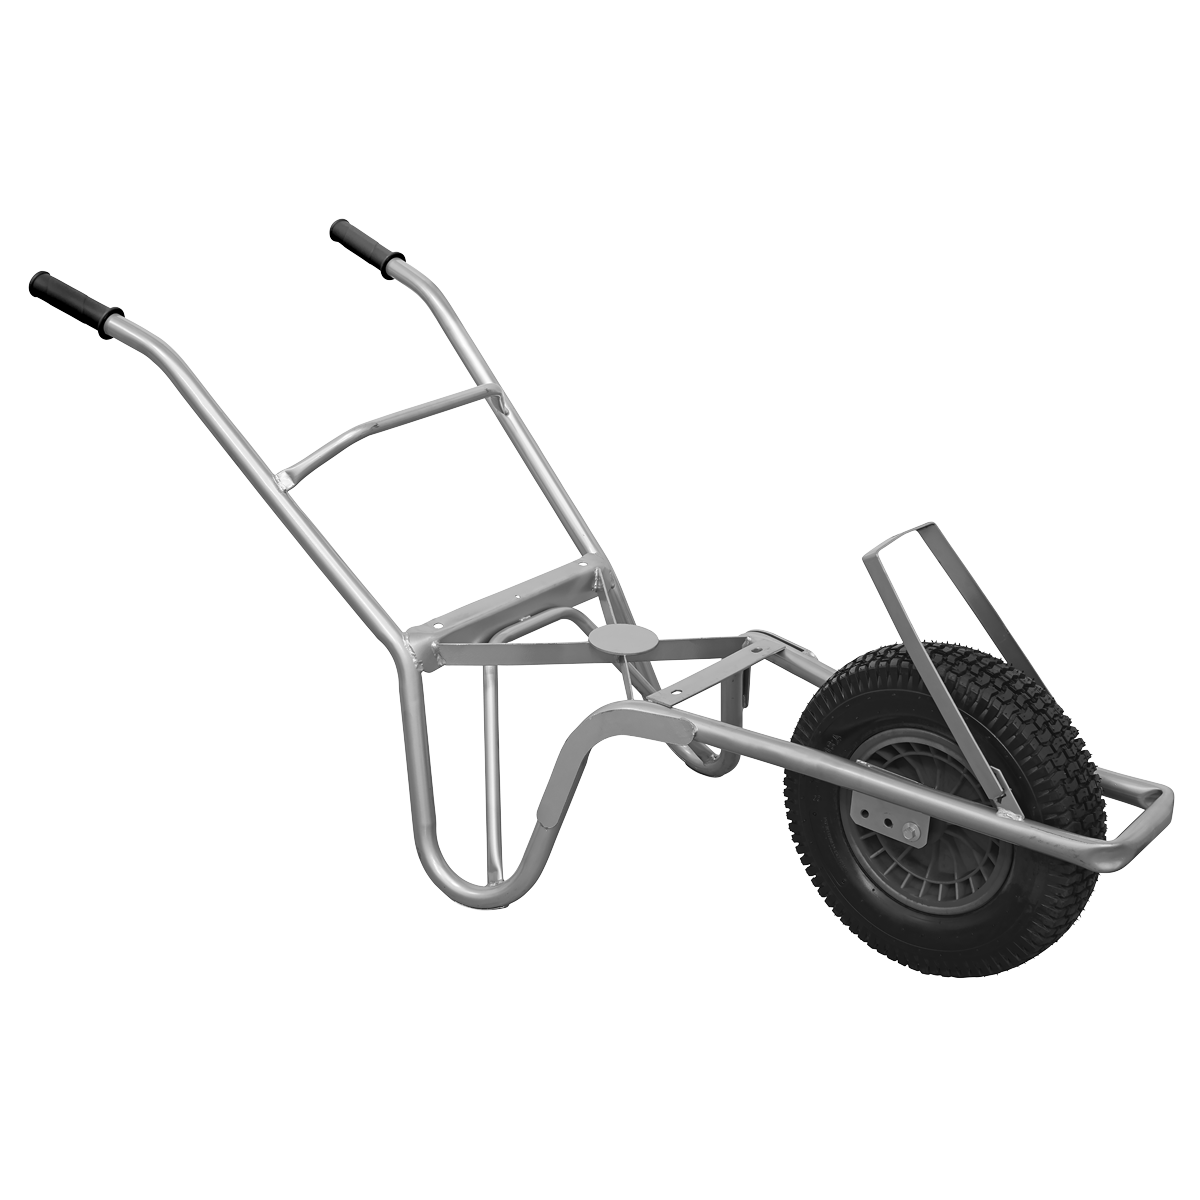 Constructed with strong tubular steel frame and rubber gripped handles.